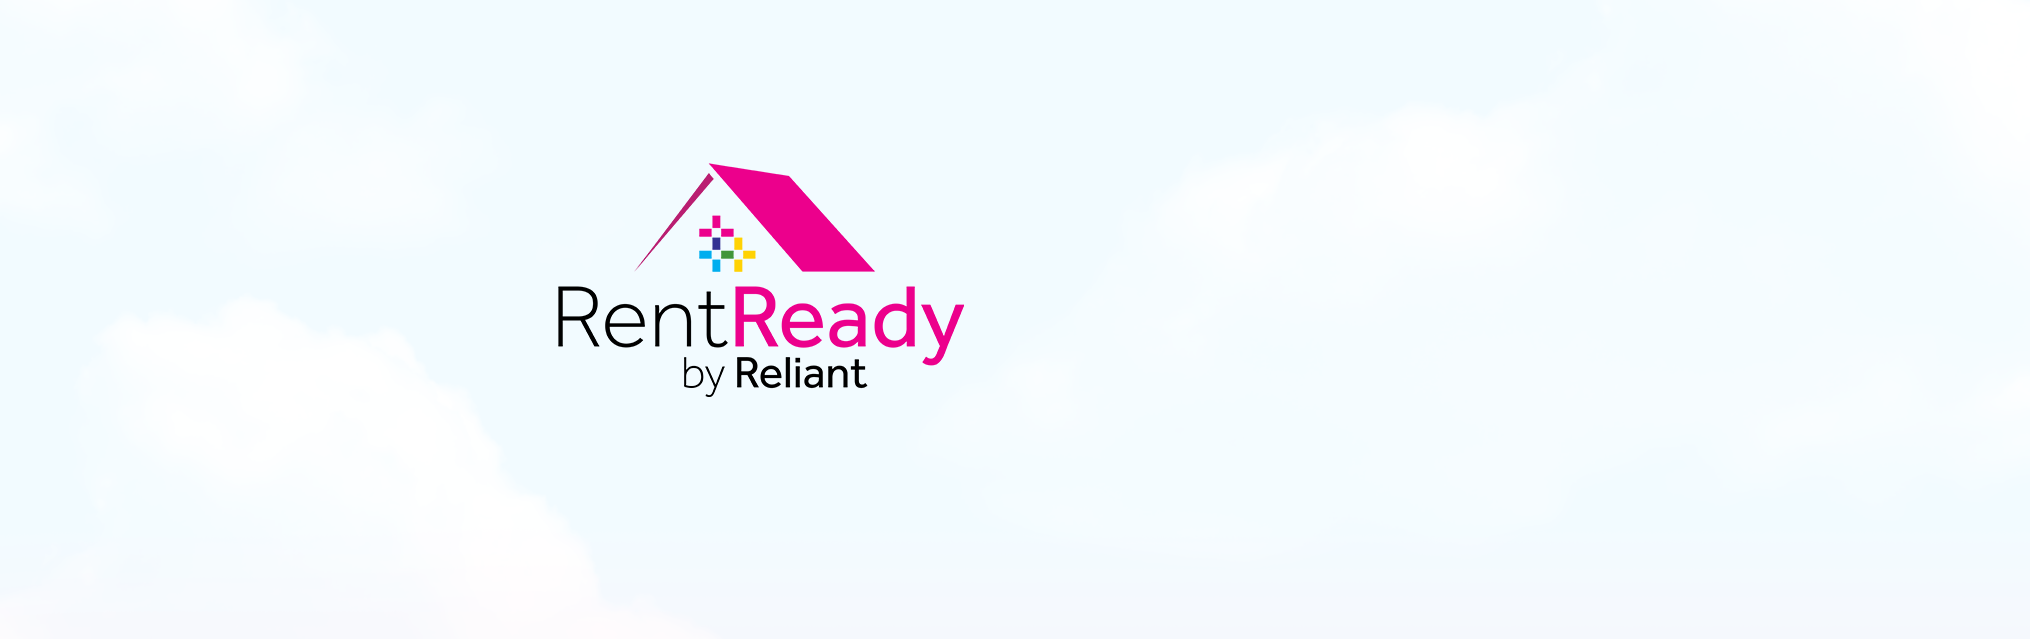 RentReady by Reliant - Plan Apartment 12  
